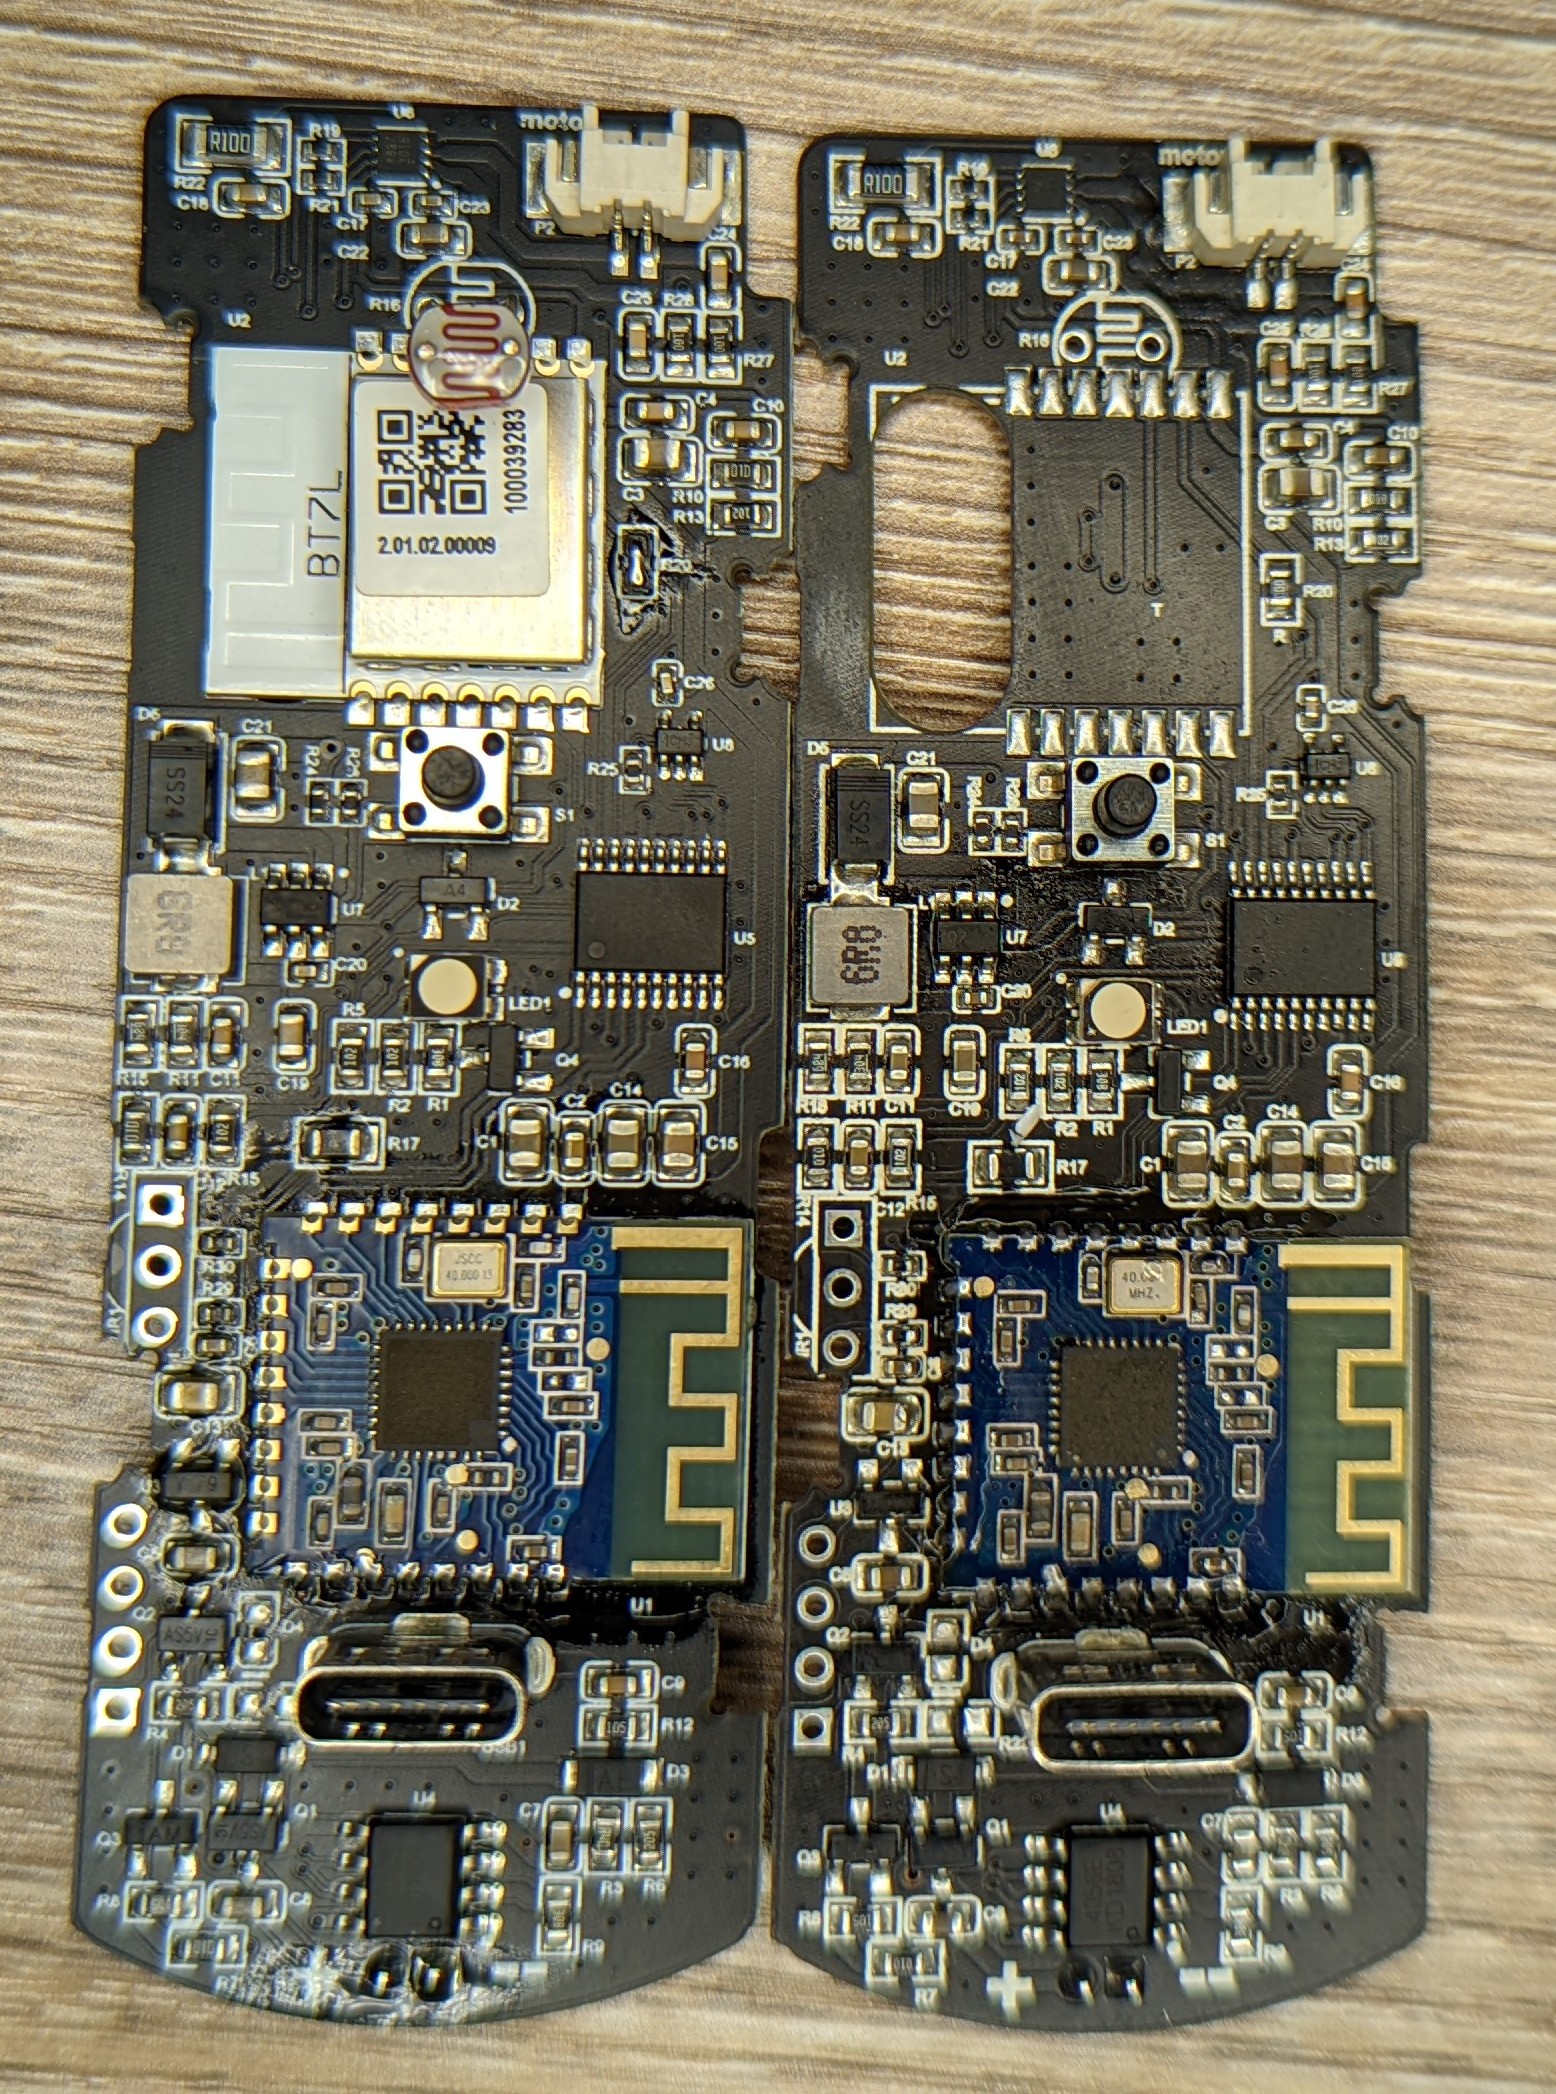 Photo showing closeup of the top of the main PCBs from both units side by side. It's clear that one PCB has two radio modules equipped.